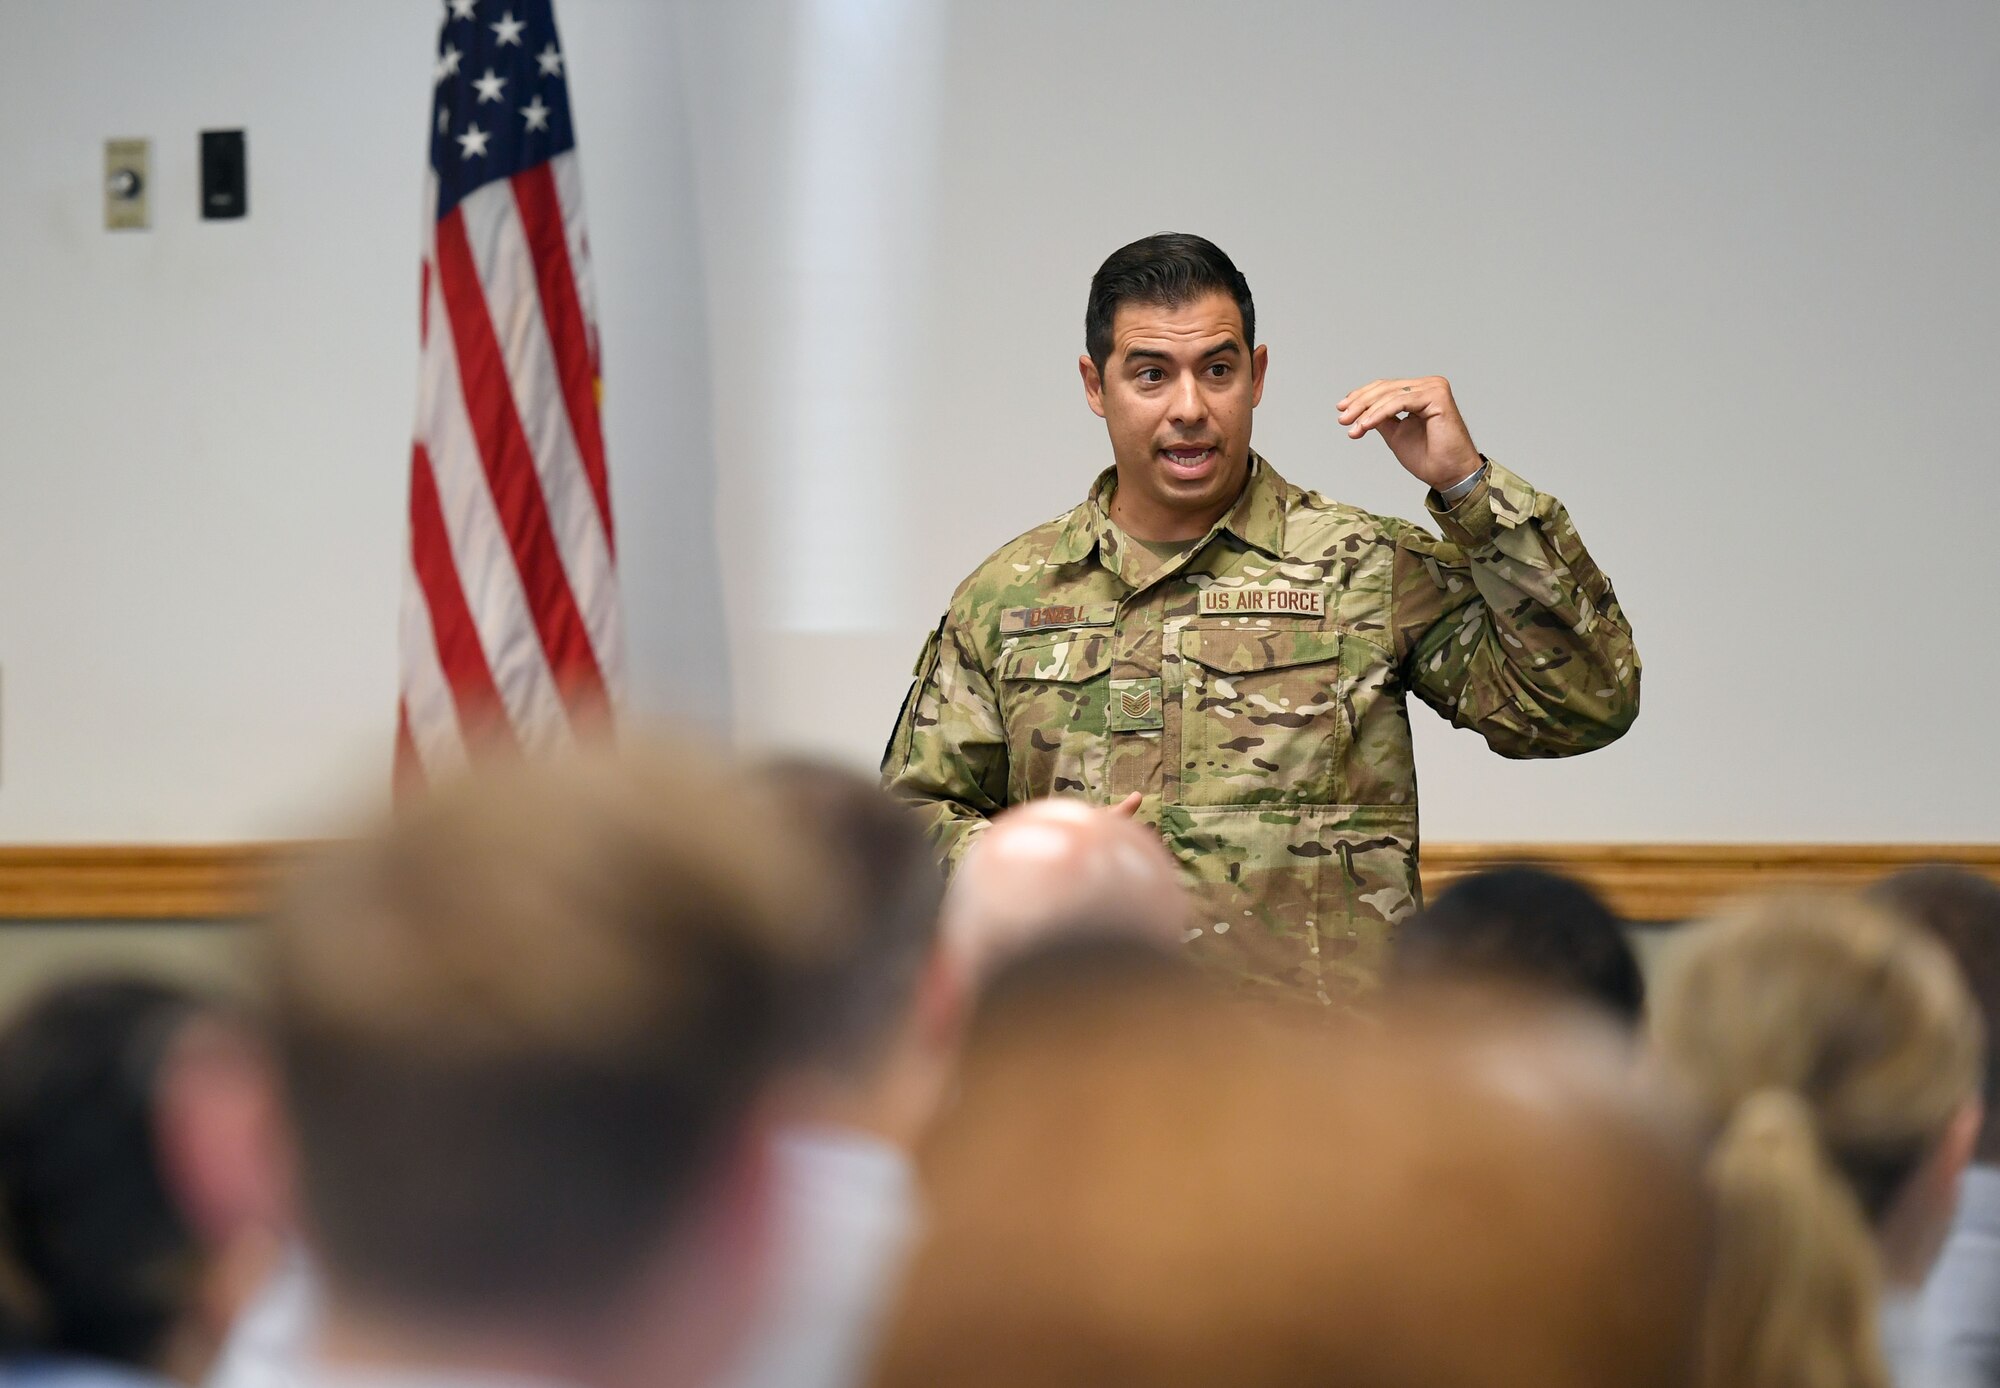 U.S. Air Force Tech. Sgt. August O'Niell, Air Force Wounded Warrior (AFW2) program ambassador, gives a brief to members of the NCO Academy inside Mathies Hall at Keesler Air Force Base, Mississippi, June 6, 2022. The AFW2 program provides concentrated non-medical care and support for combat wounded, ill and injured Airmen and their families as they recover and transition back to duty or into civilian life. (U.S. Air Force photo by Kemberly Groue)